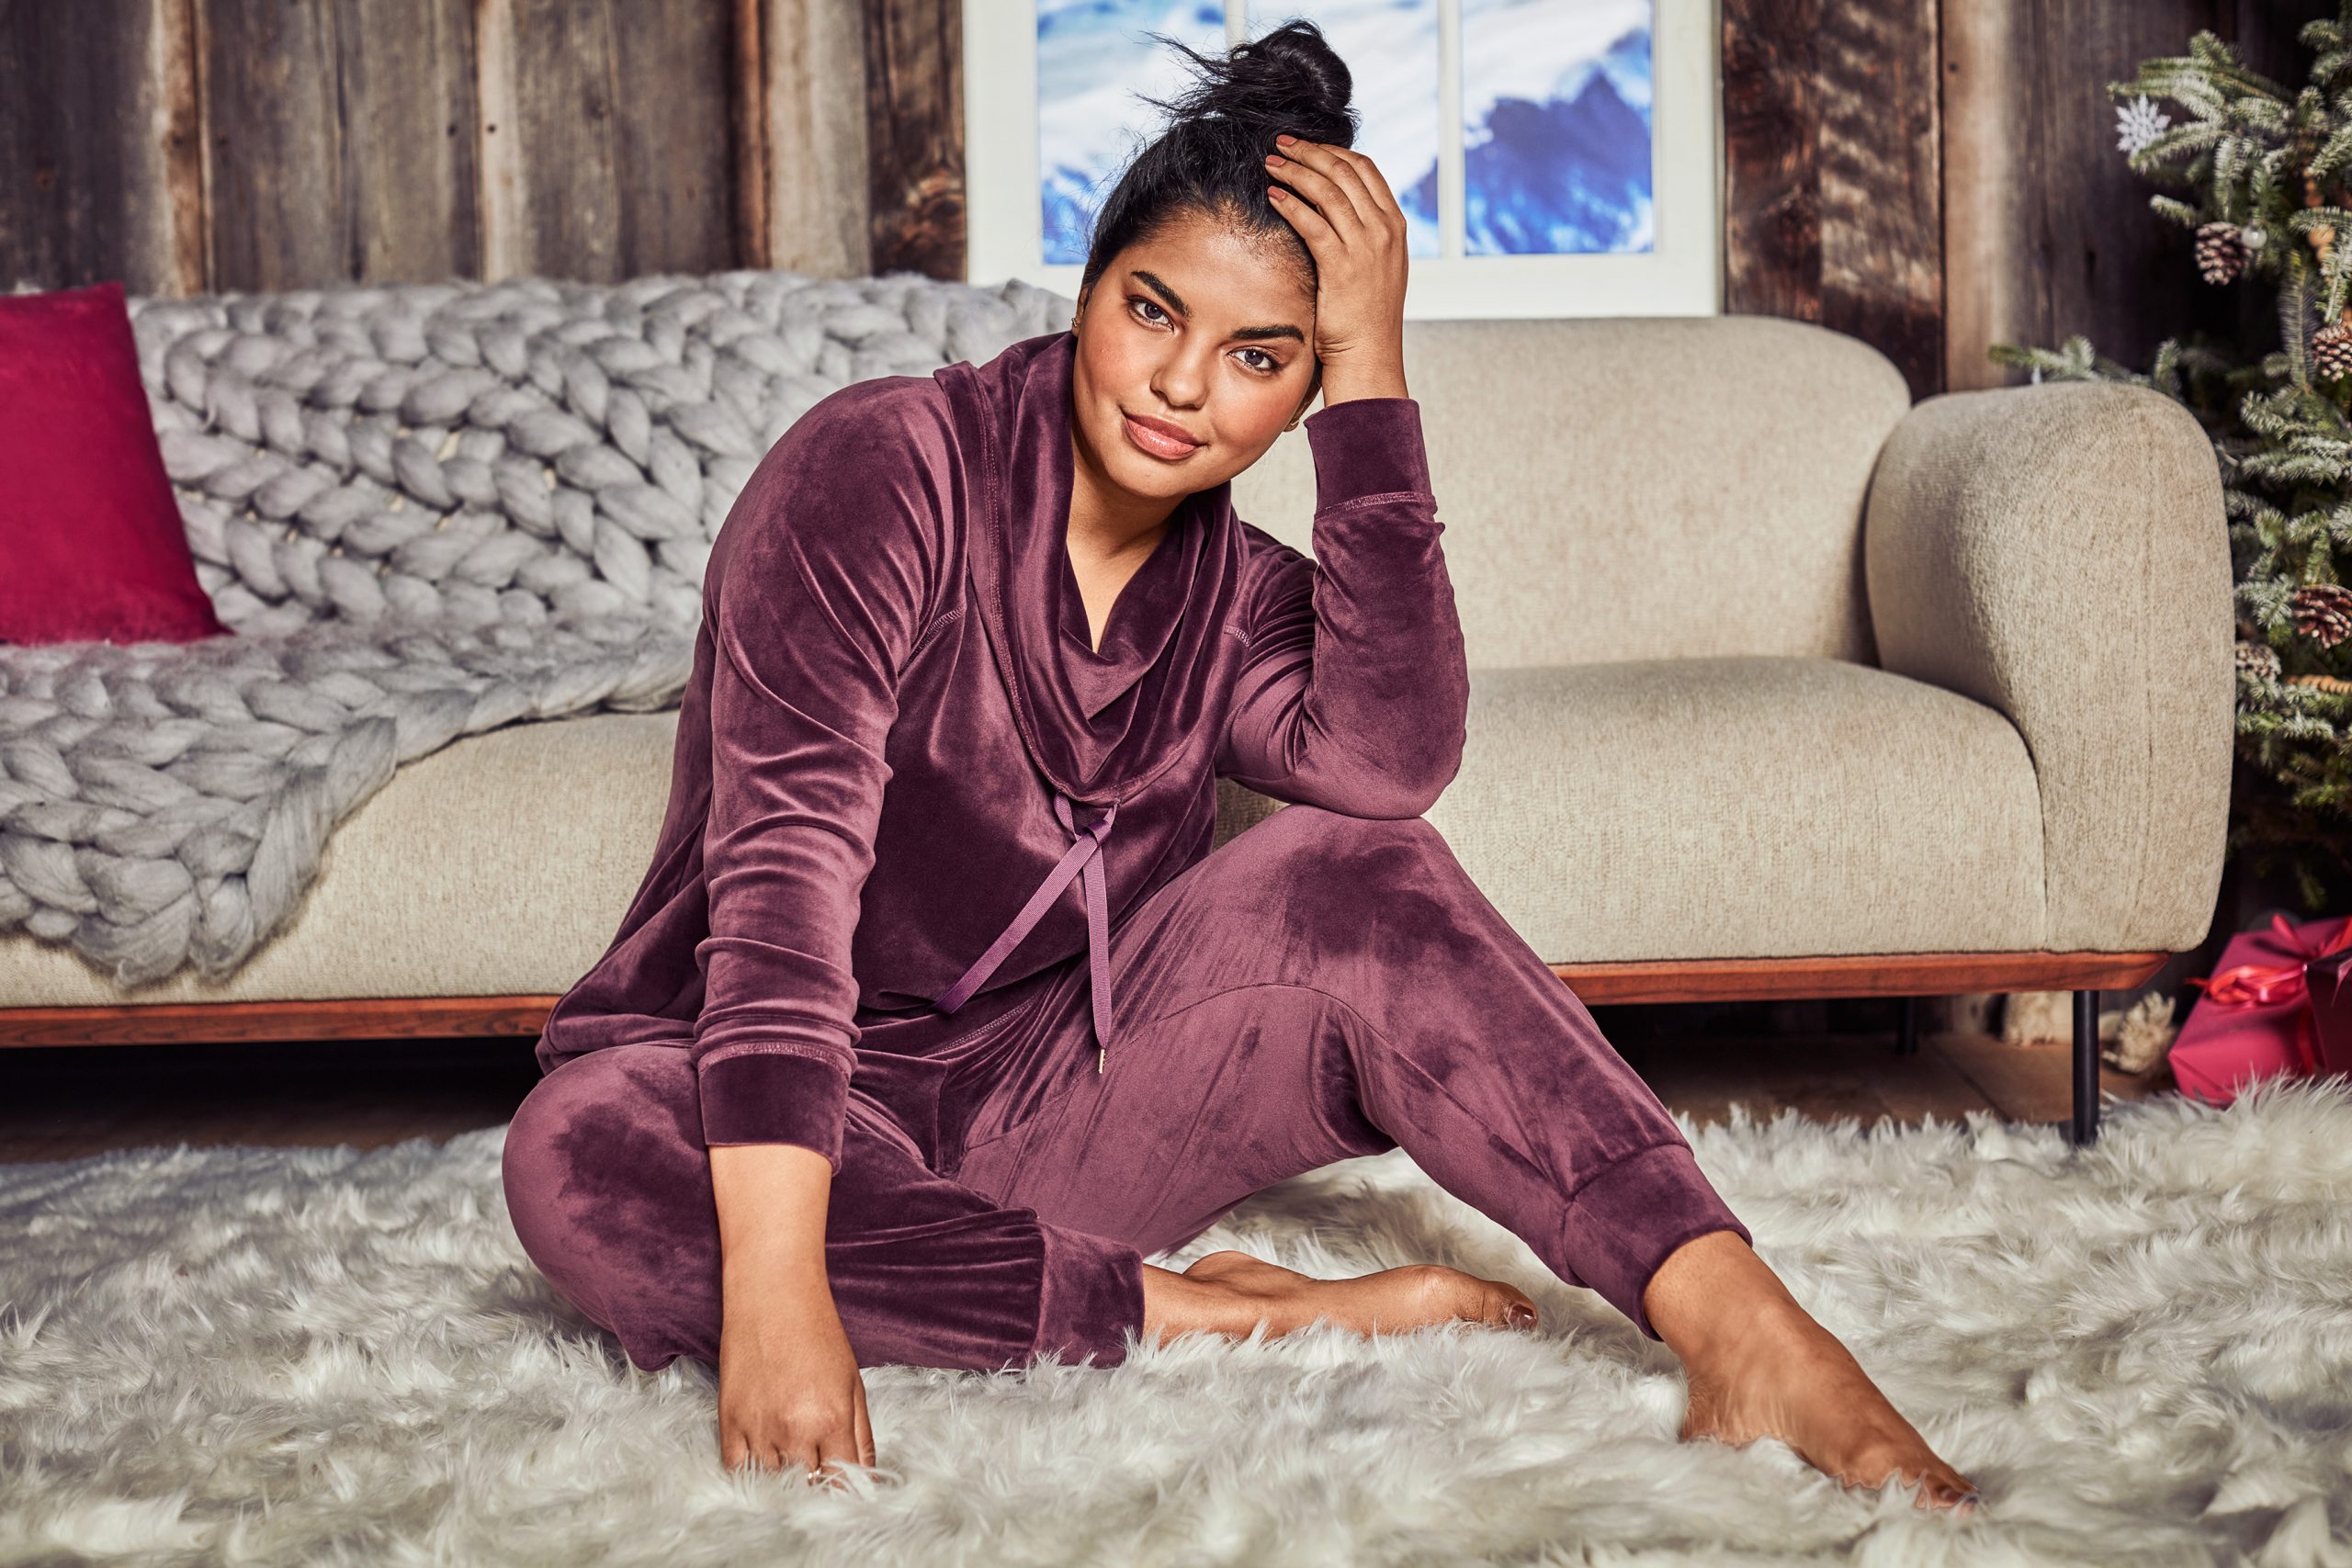 15 Lane Bryant Holiday Gift Ideas That Will WOW!